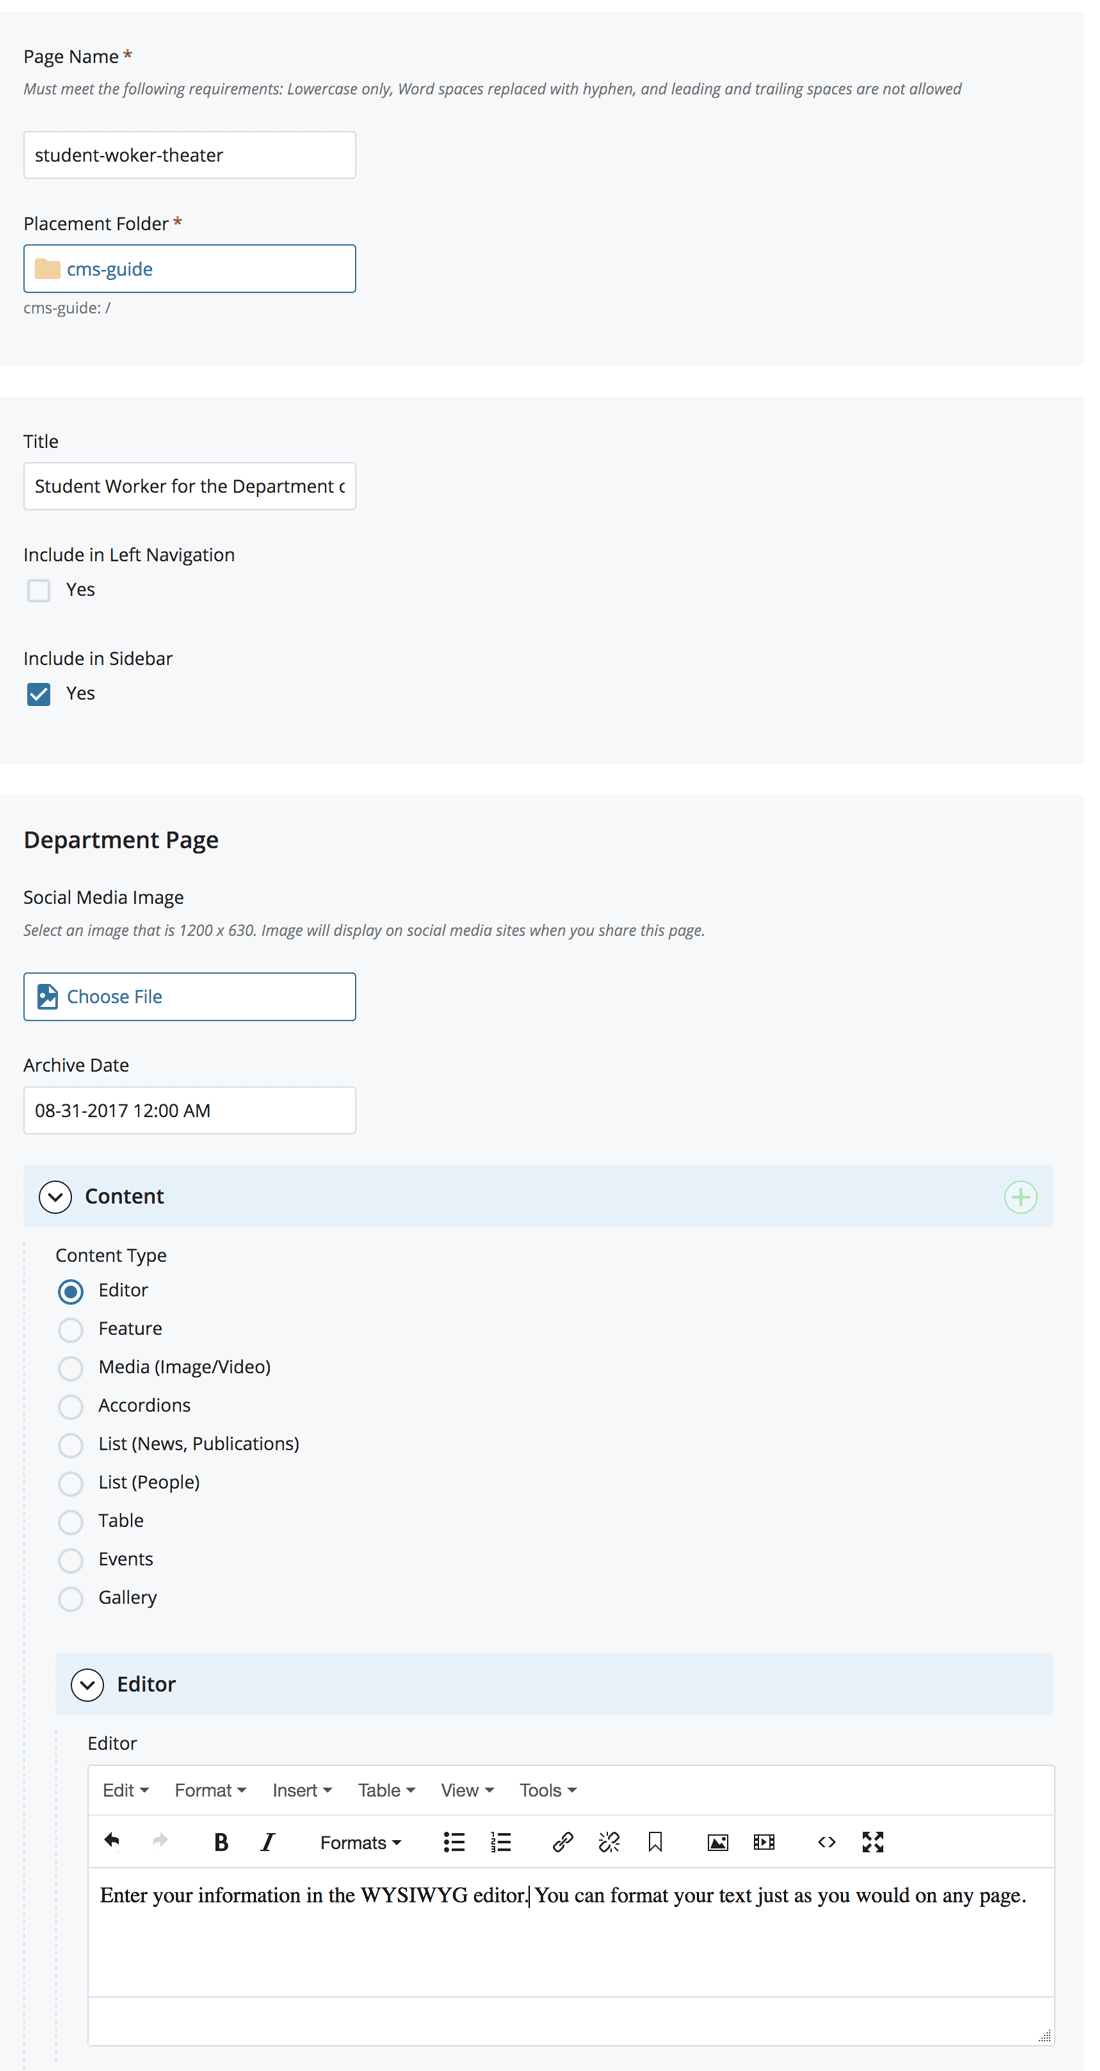 screenshot of fields to fill in when creating a new announcement content type